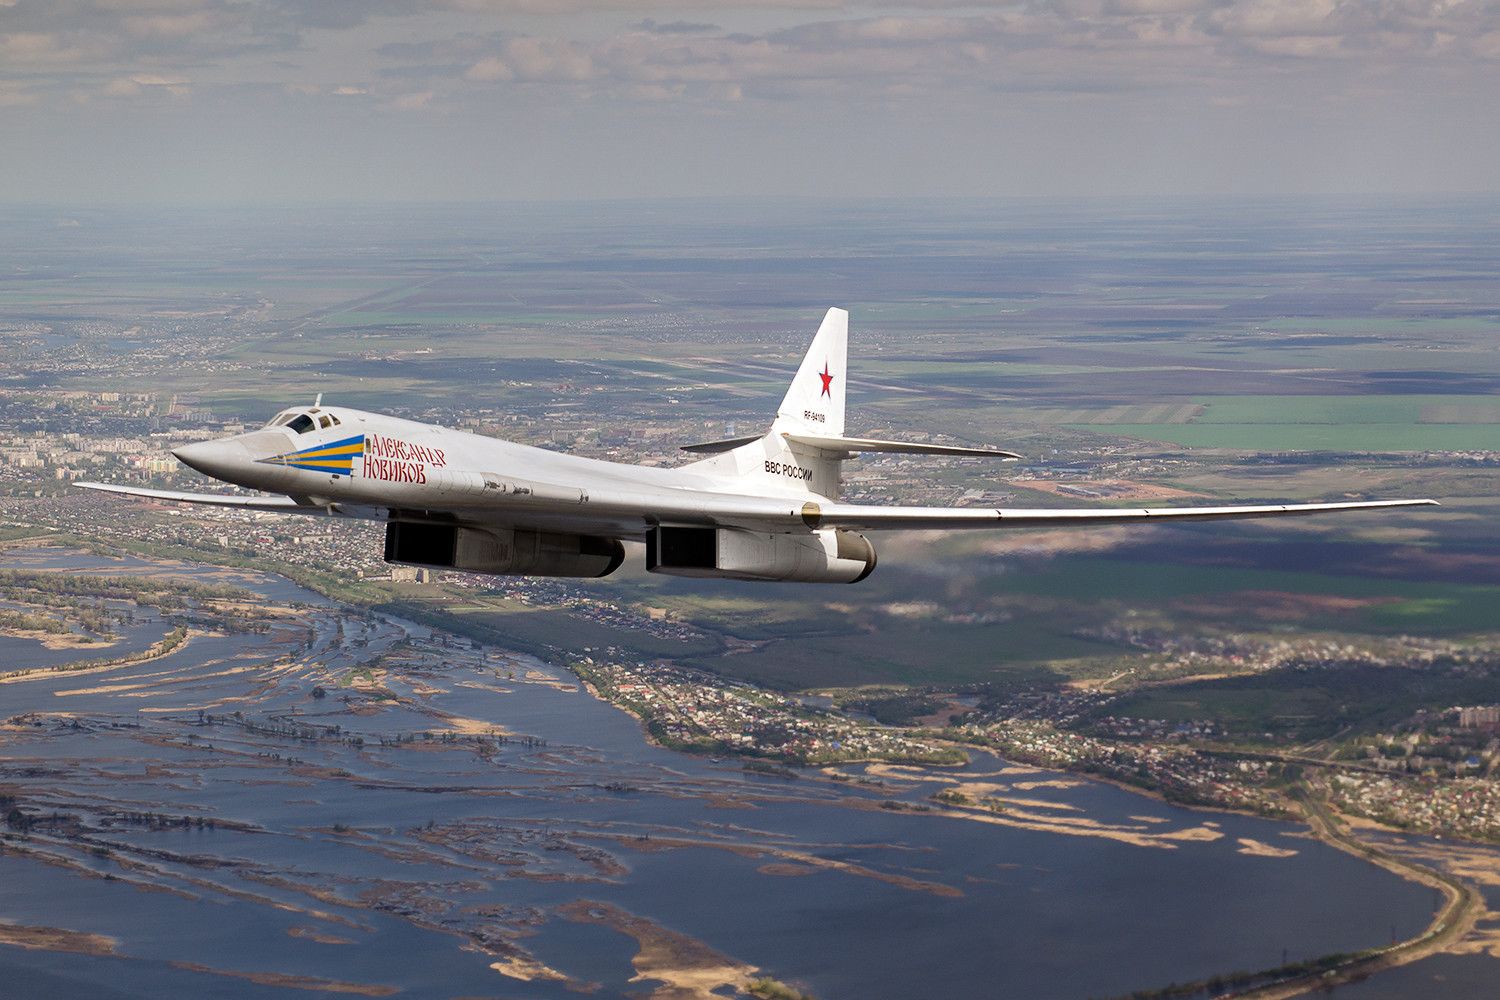 A Tupolev Tu-160 flying in the sky.